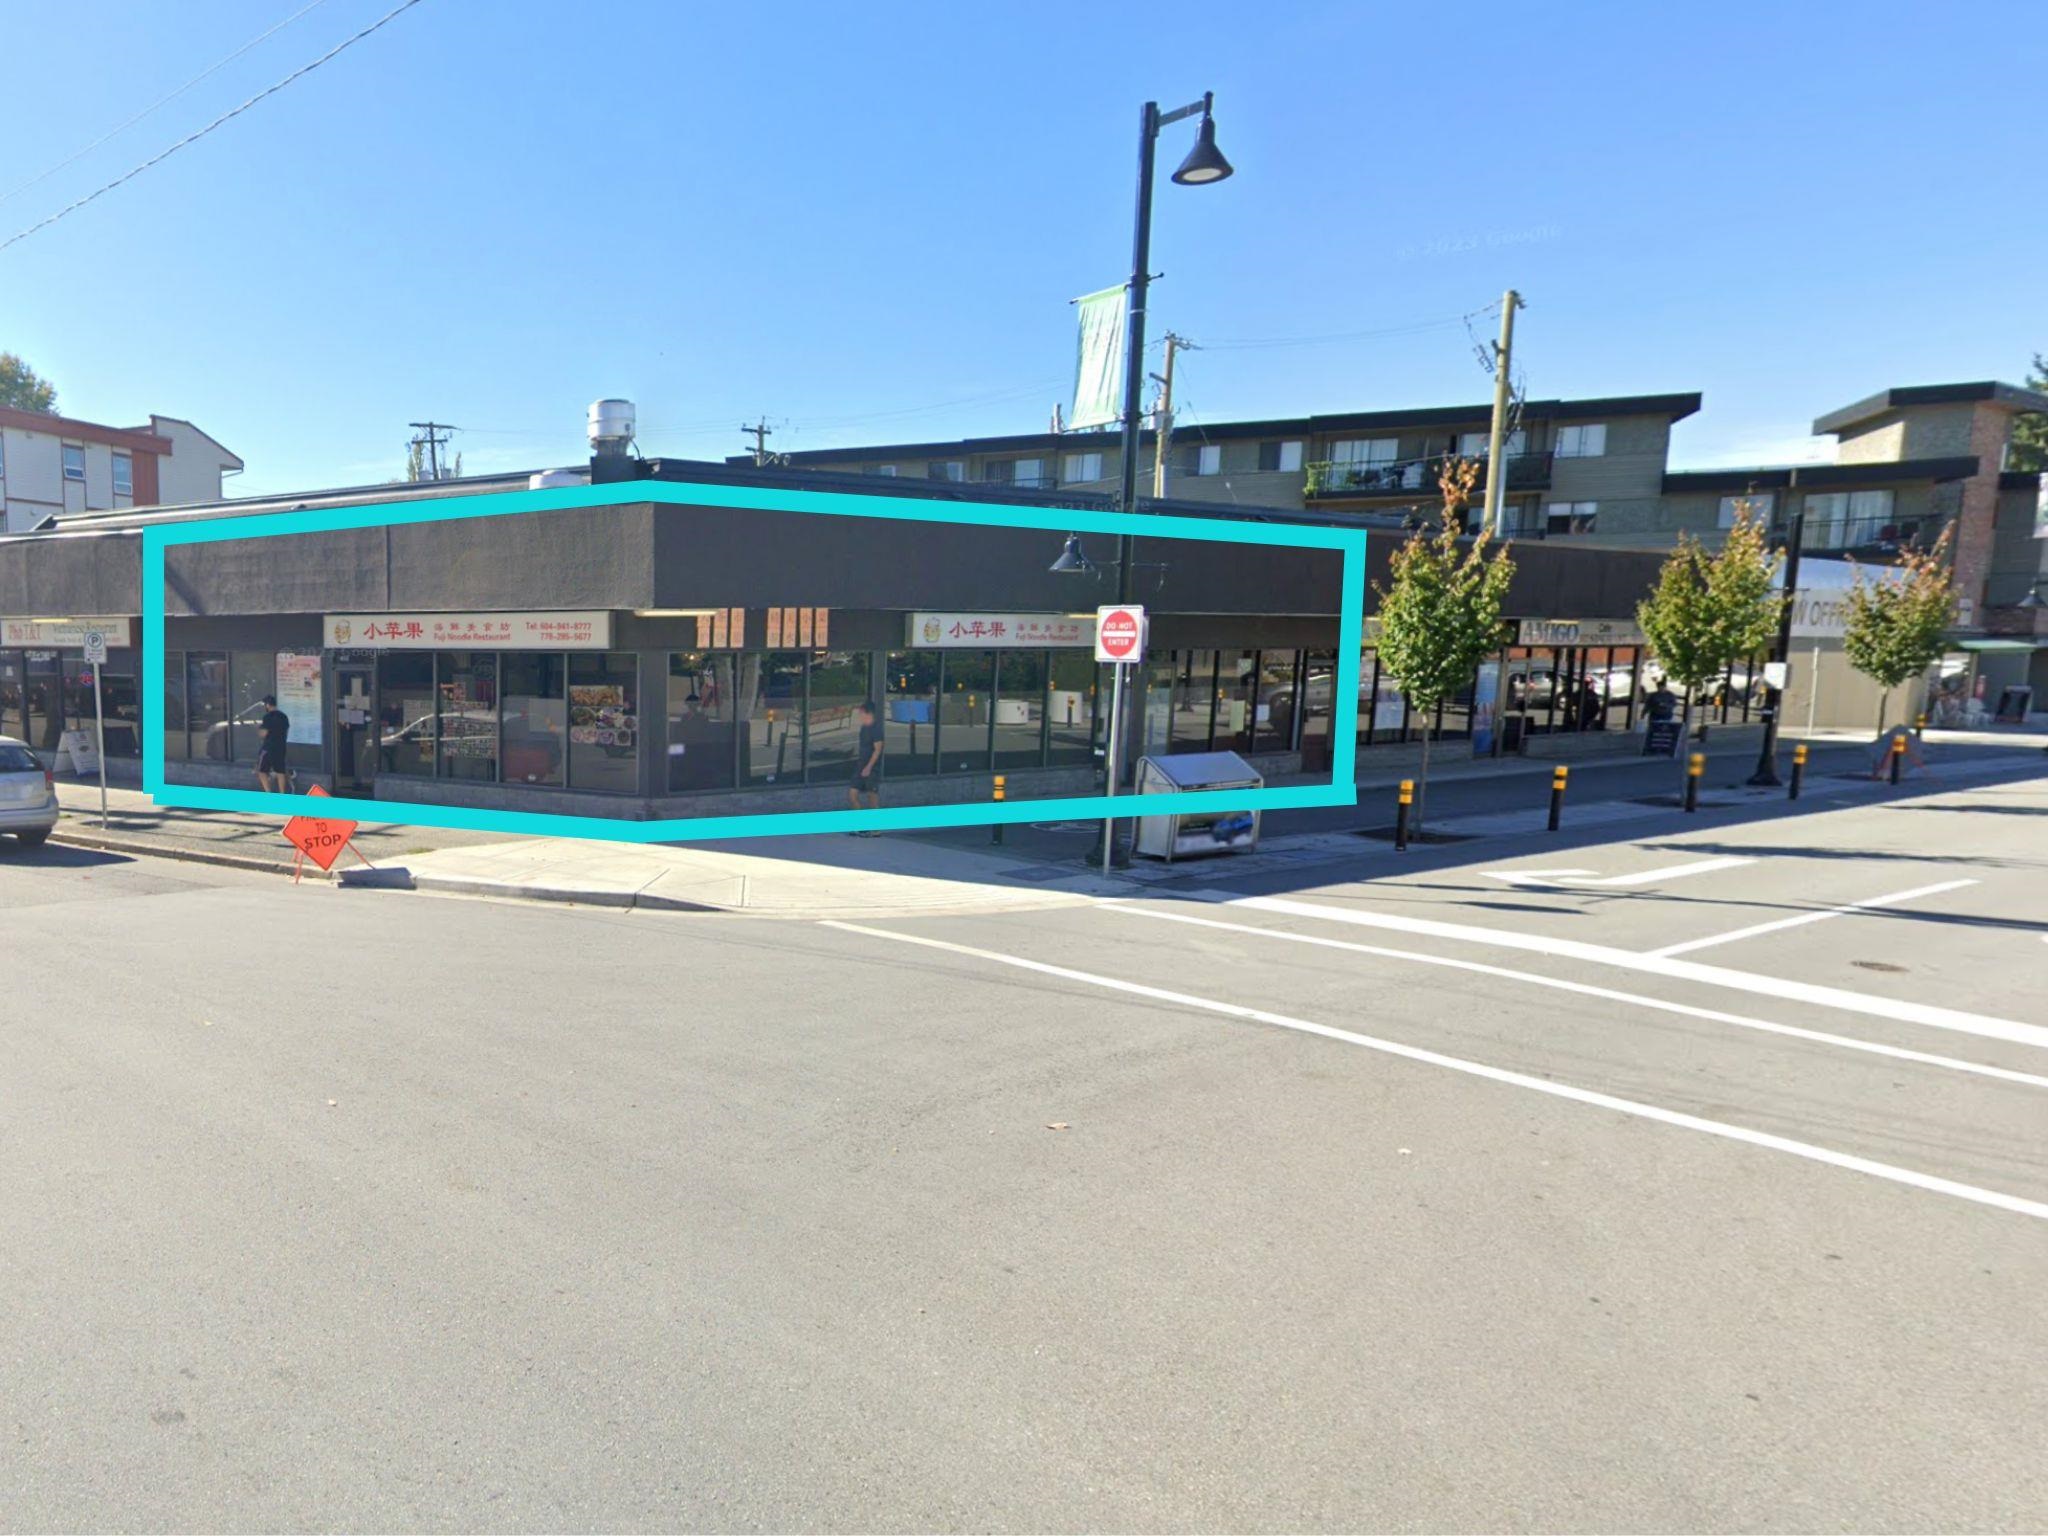 Central Pt Coquitlam Land Commercial for sale:    (Listed 6800-05-02)